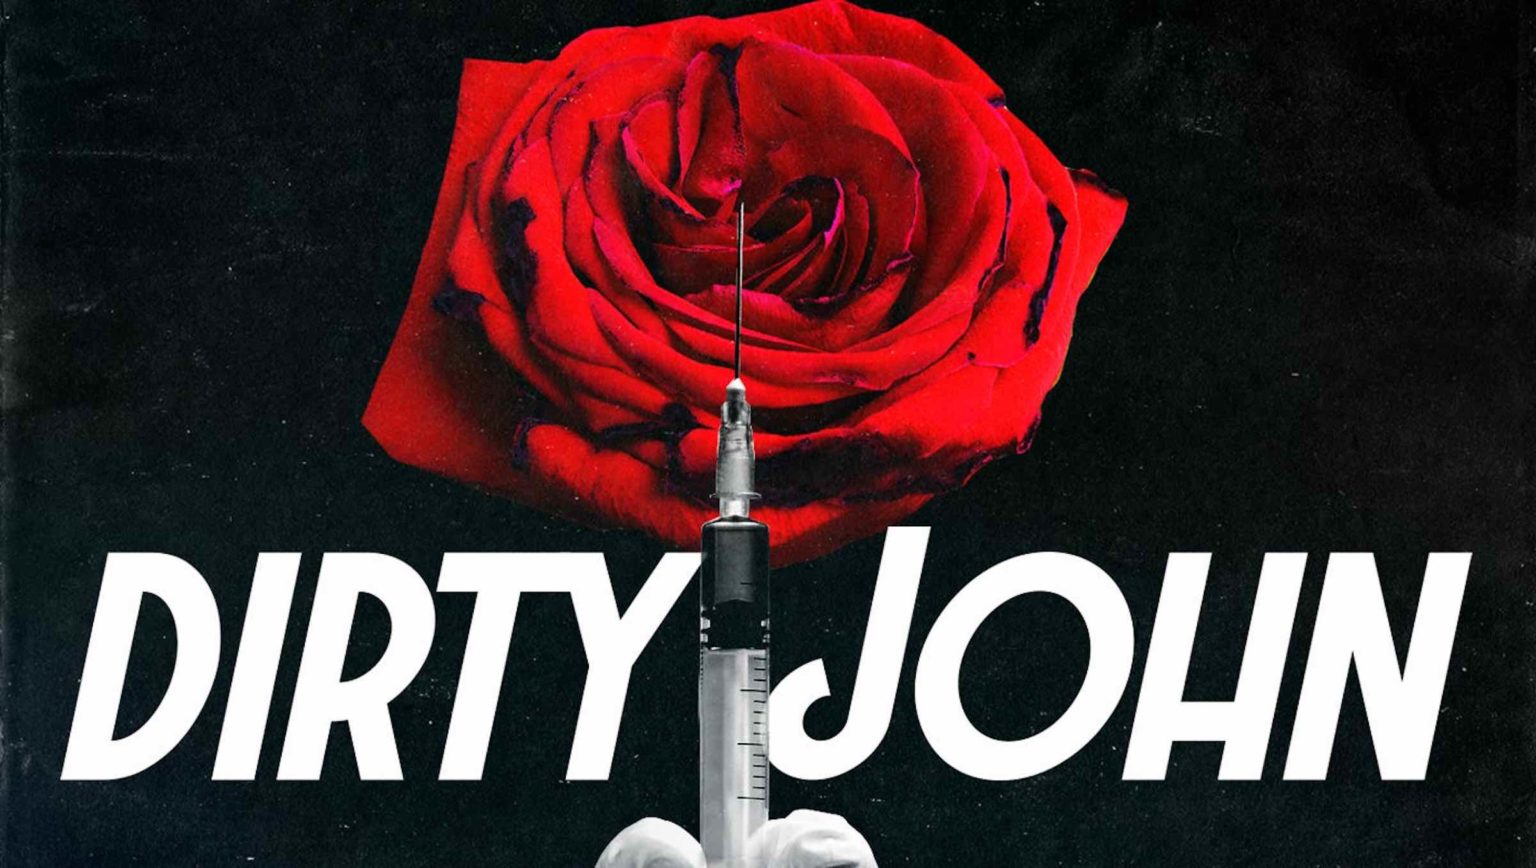 The 'Dirty John' podcast reminds us that sometimes that dream ends up being a nightmare. Here's everything we know about 'Dirty John'.